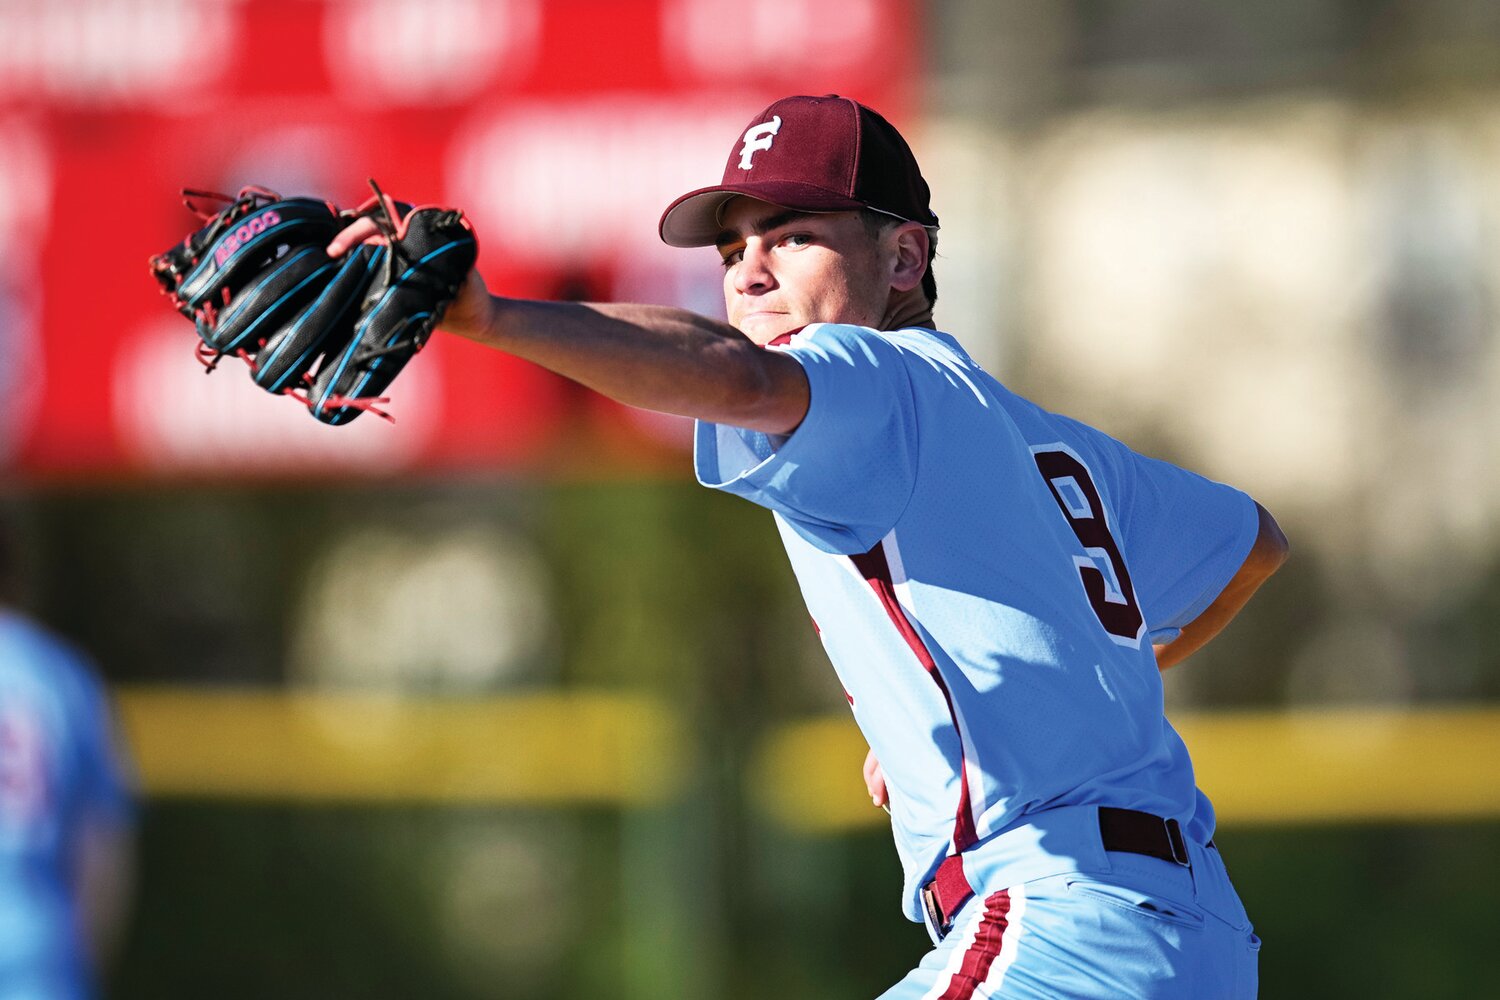 Faith Christian’s Reid Miller dominated for six and one-third innings, striking out 14 and giving up only one hit.